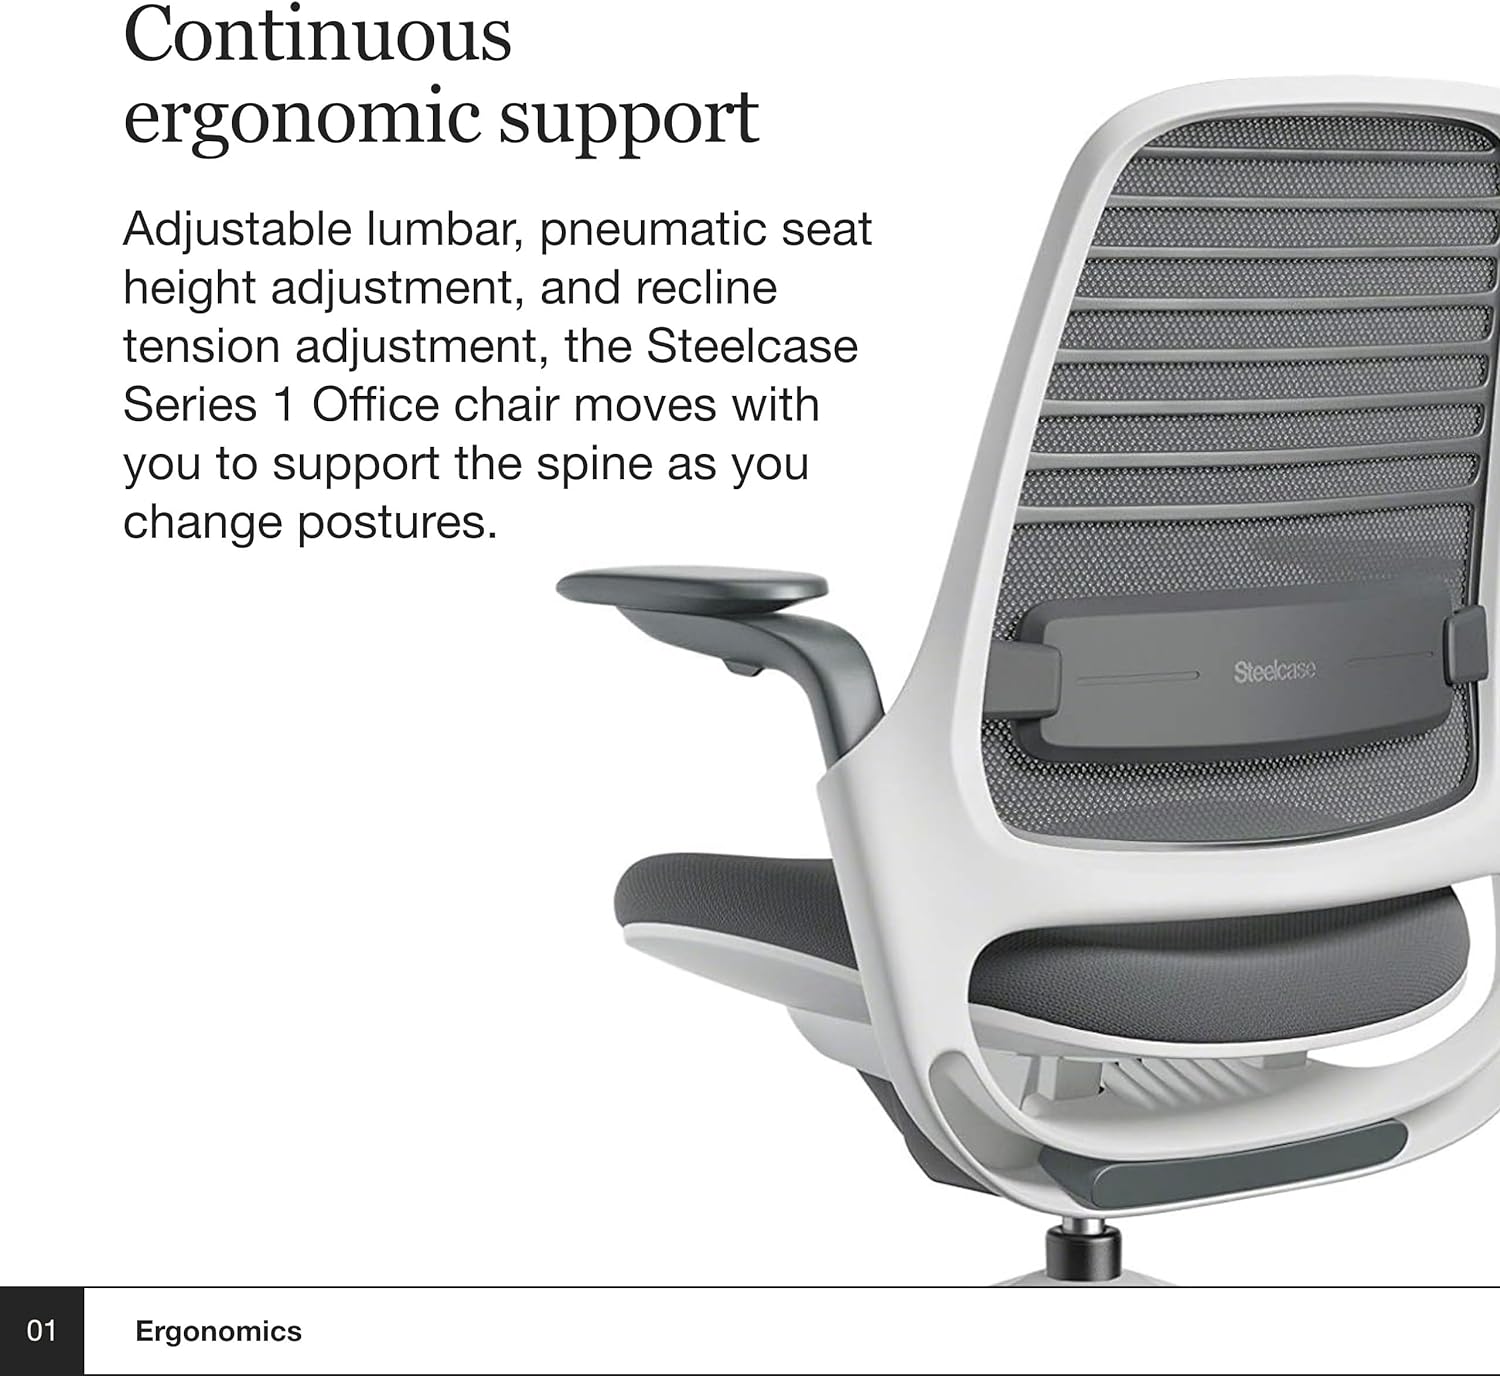 Steelcase Series 1 Office Chair - Ergonomic Work Chair with Wheels for Hard Flooring - Helps Support Productivity - Weight-Activated Controls, Back Supports Arm Support - Easy Assembly - Graphite